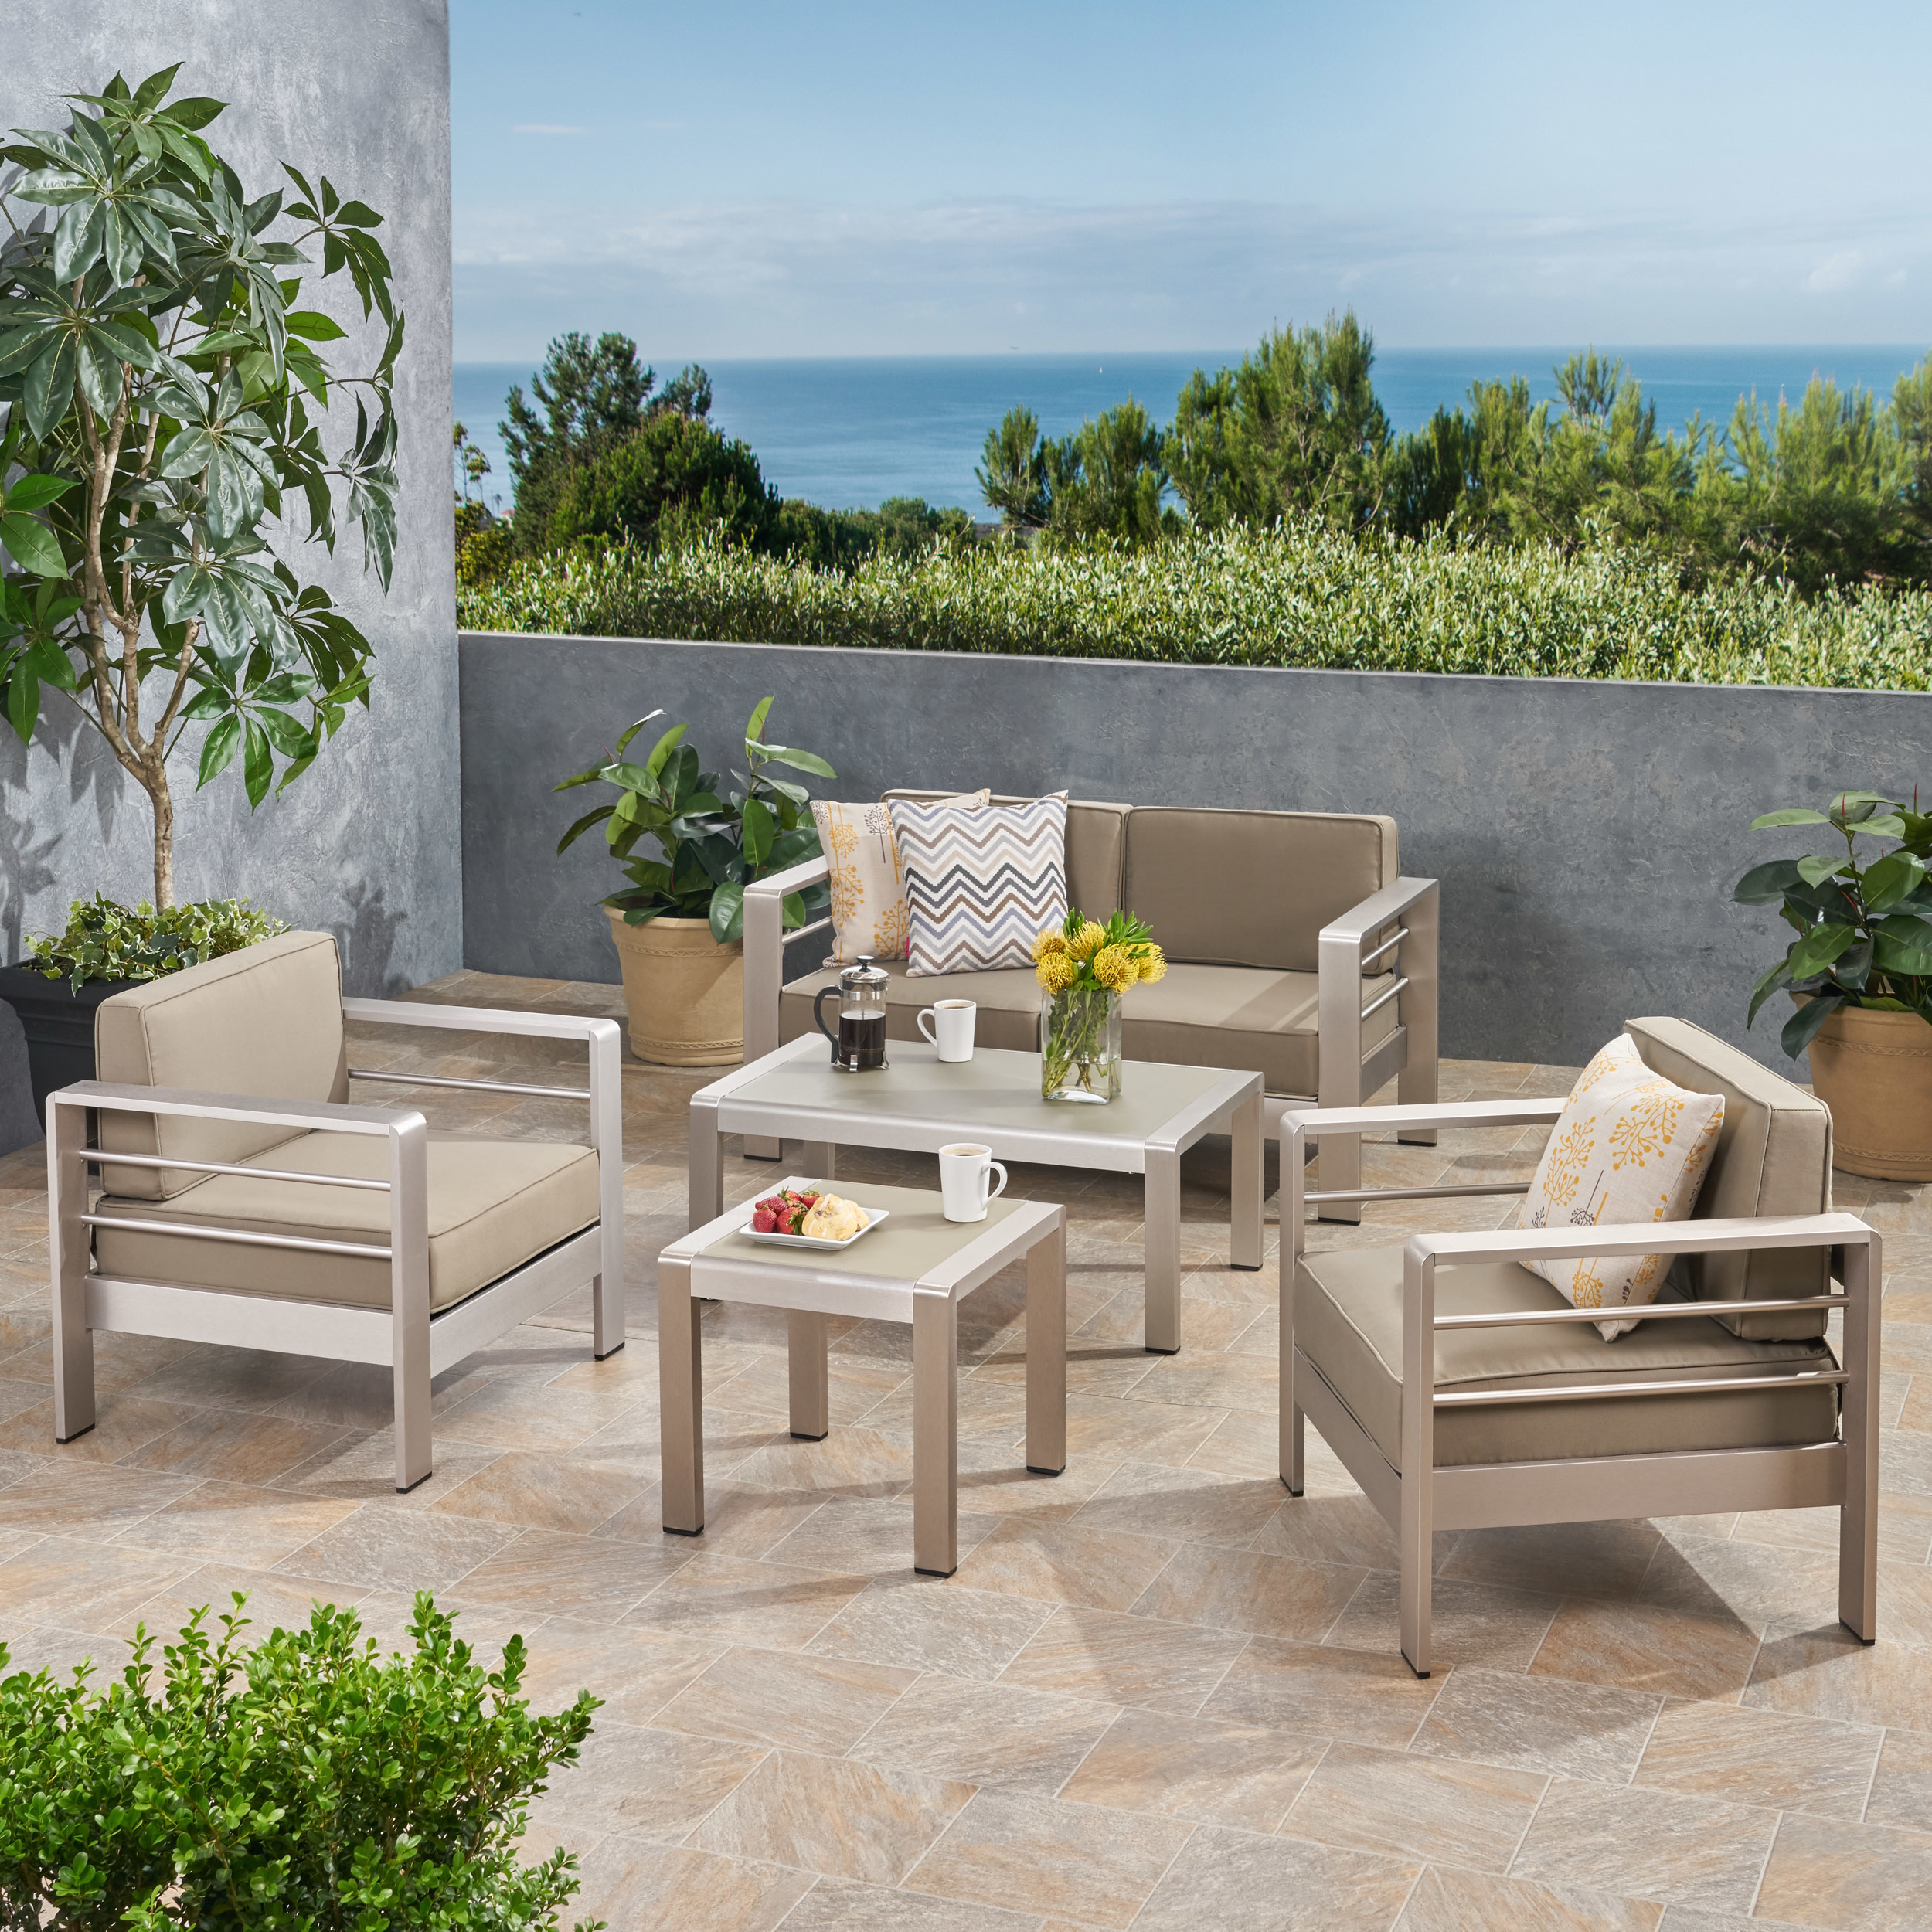 Yolanda Coral Outdoor 4 Seater Aluminum Chat Set With Side Table - Silver, Khaki